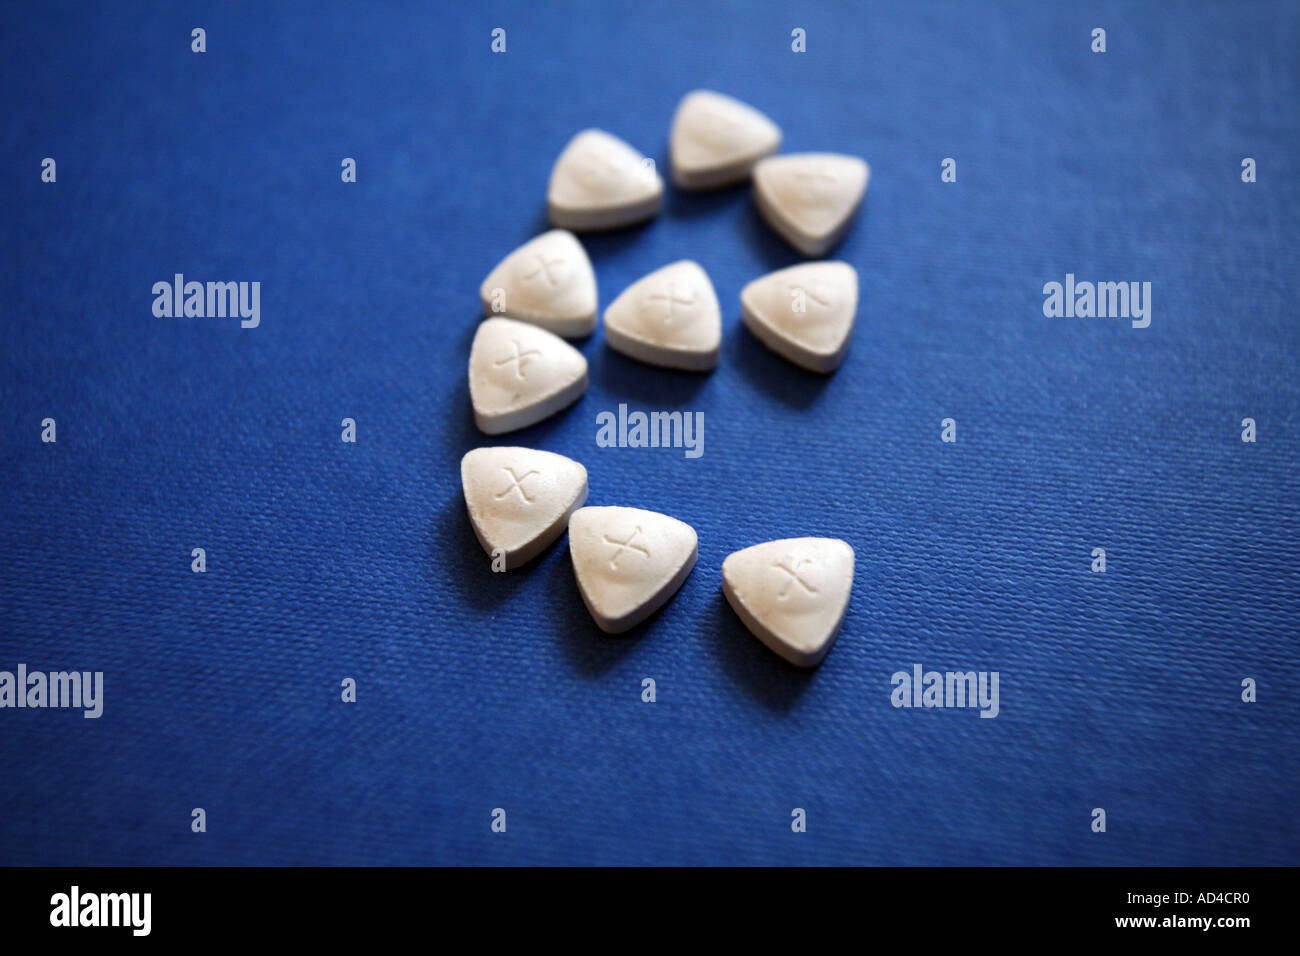 Ecstasy Tablets High Resolution Stock Photography and Images - Alamy